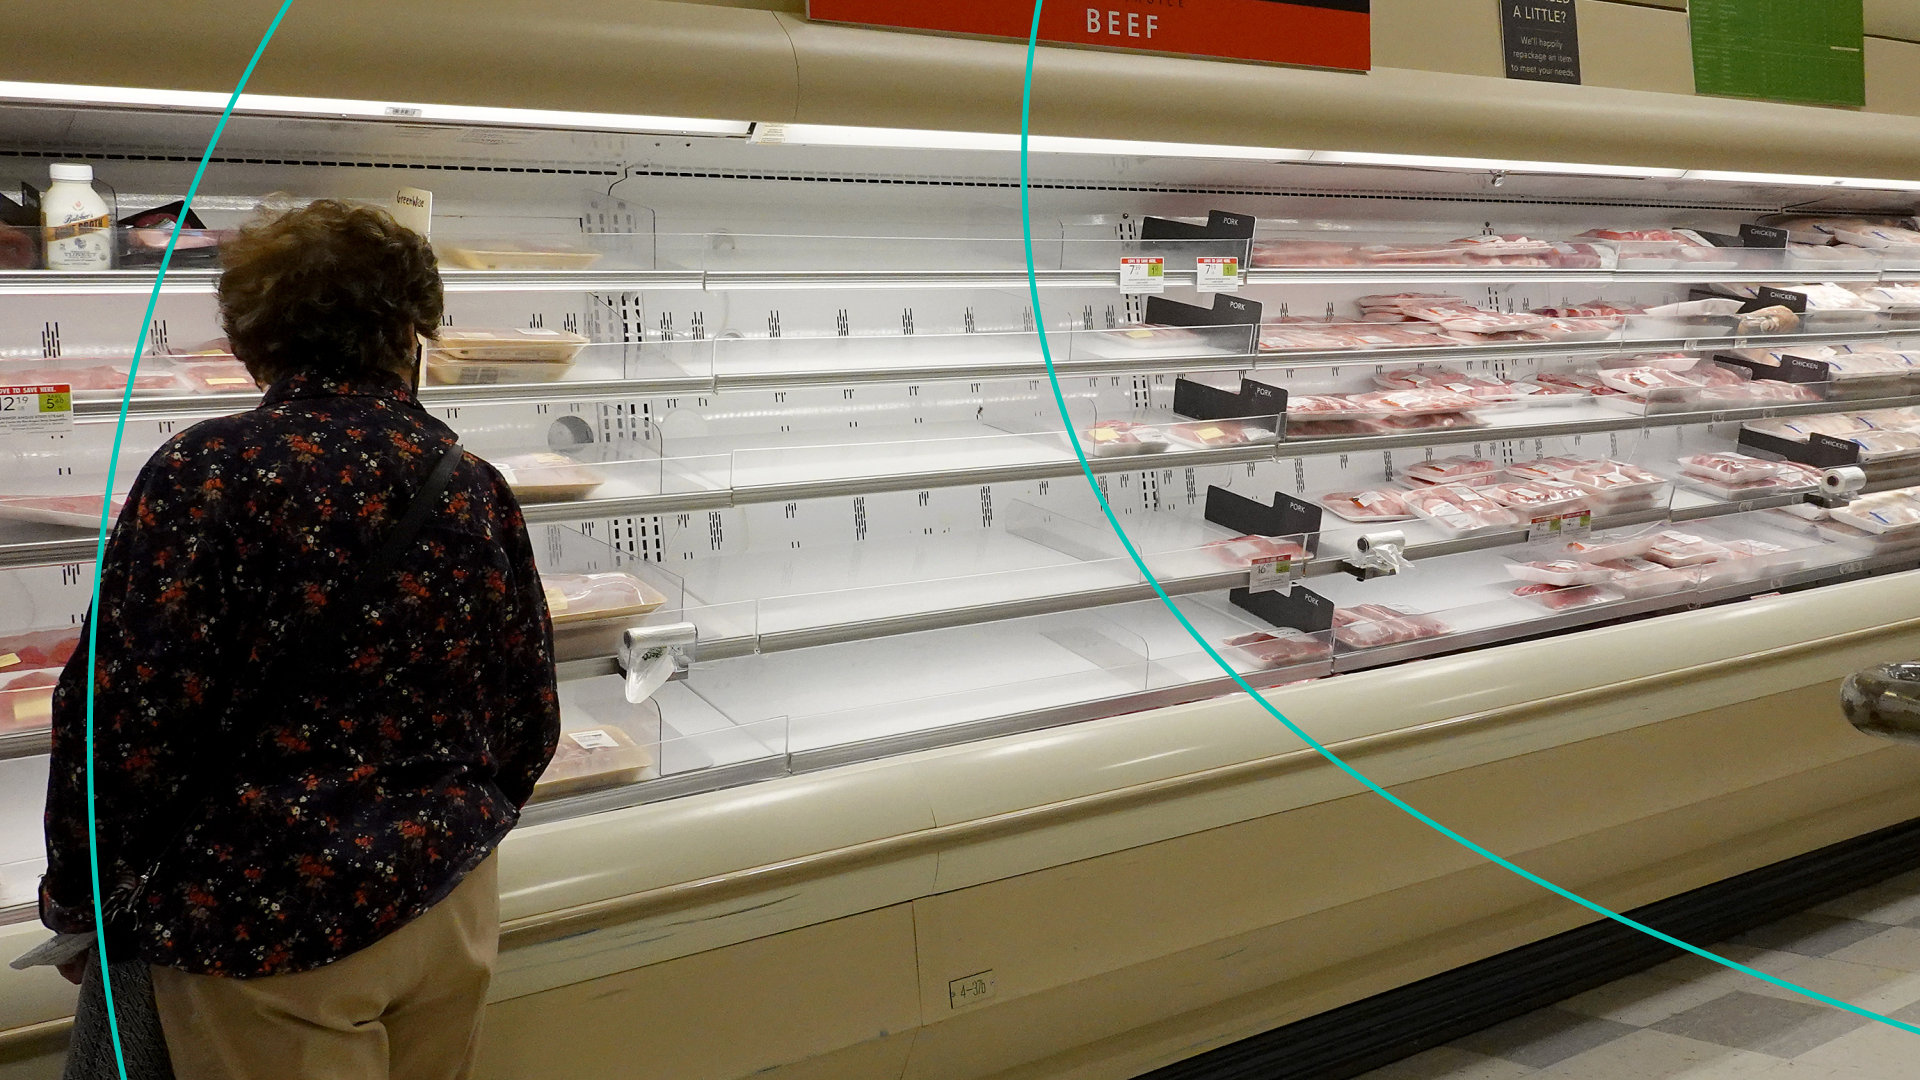 Shelves displaying meat are partially empty as shoppers makes their way through a supermarket